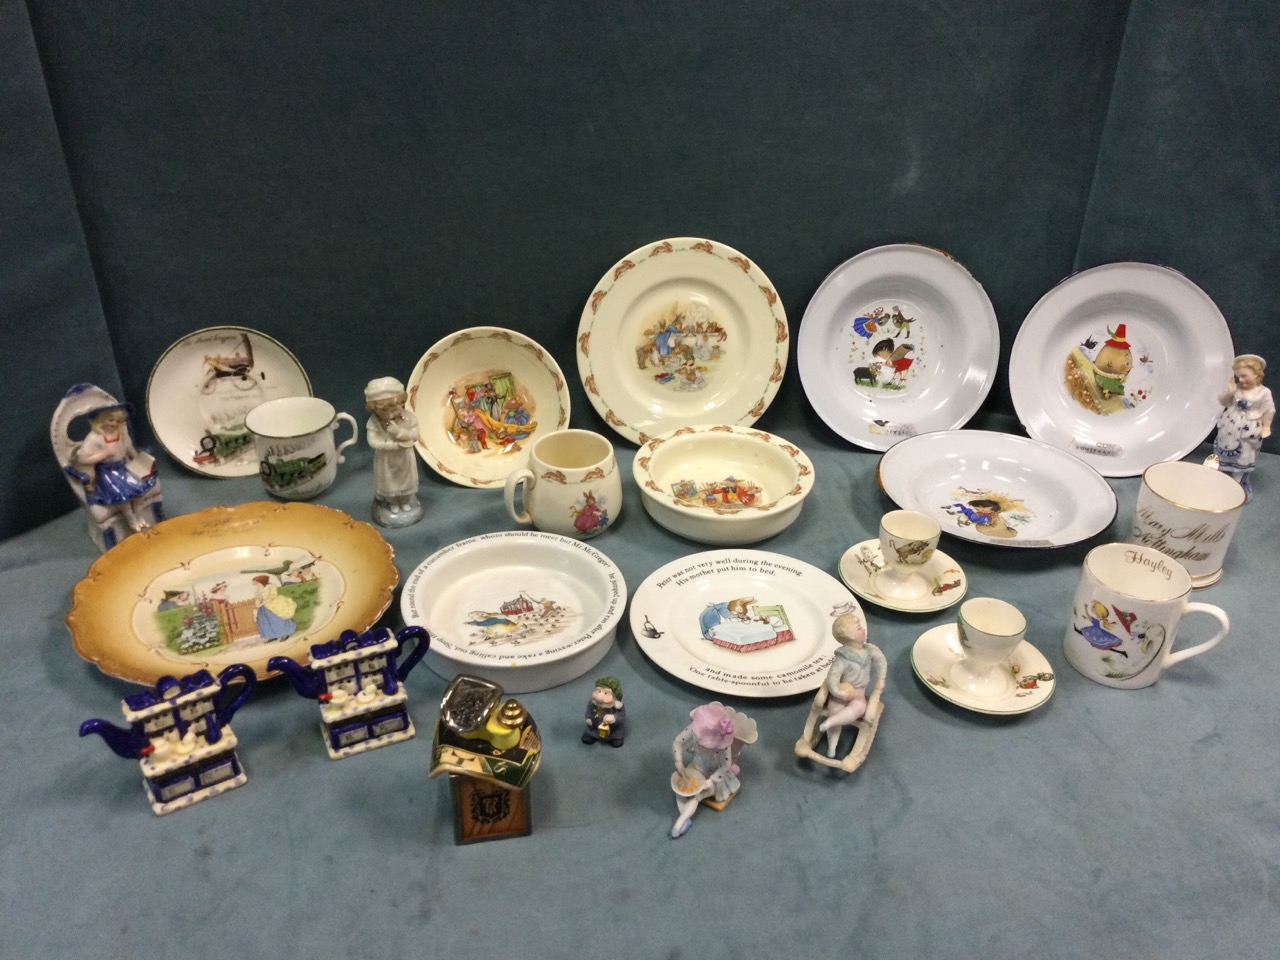 Miscellaneous childrens ceramics including a porcelain christening tankard dated 1863, a pair of